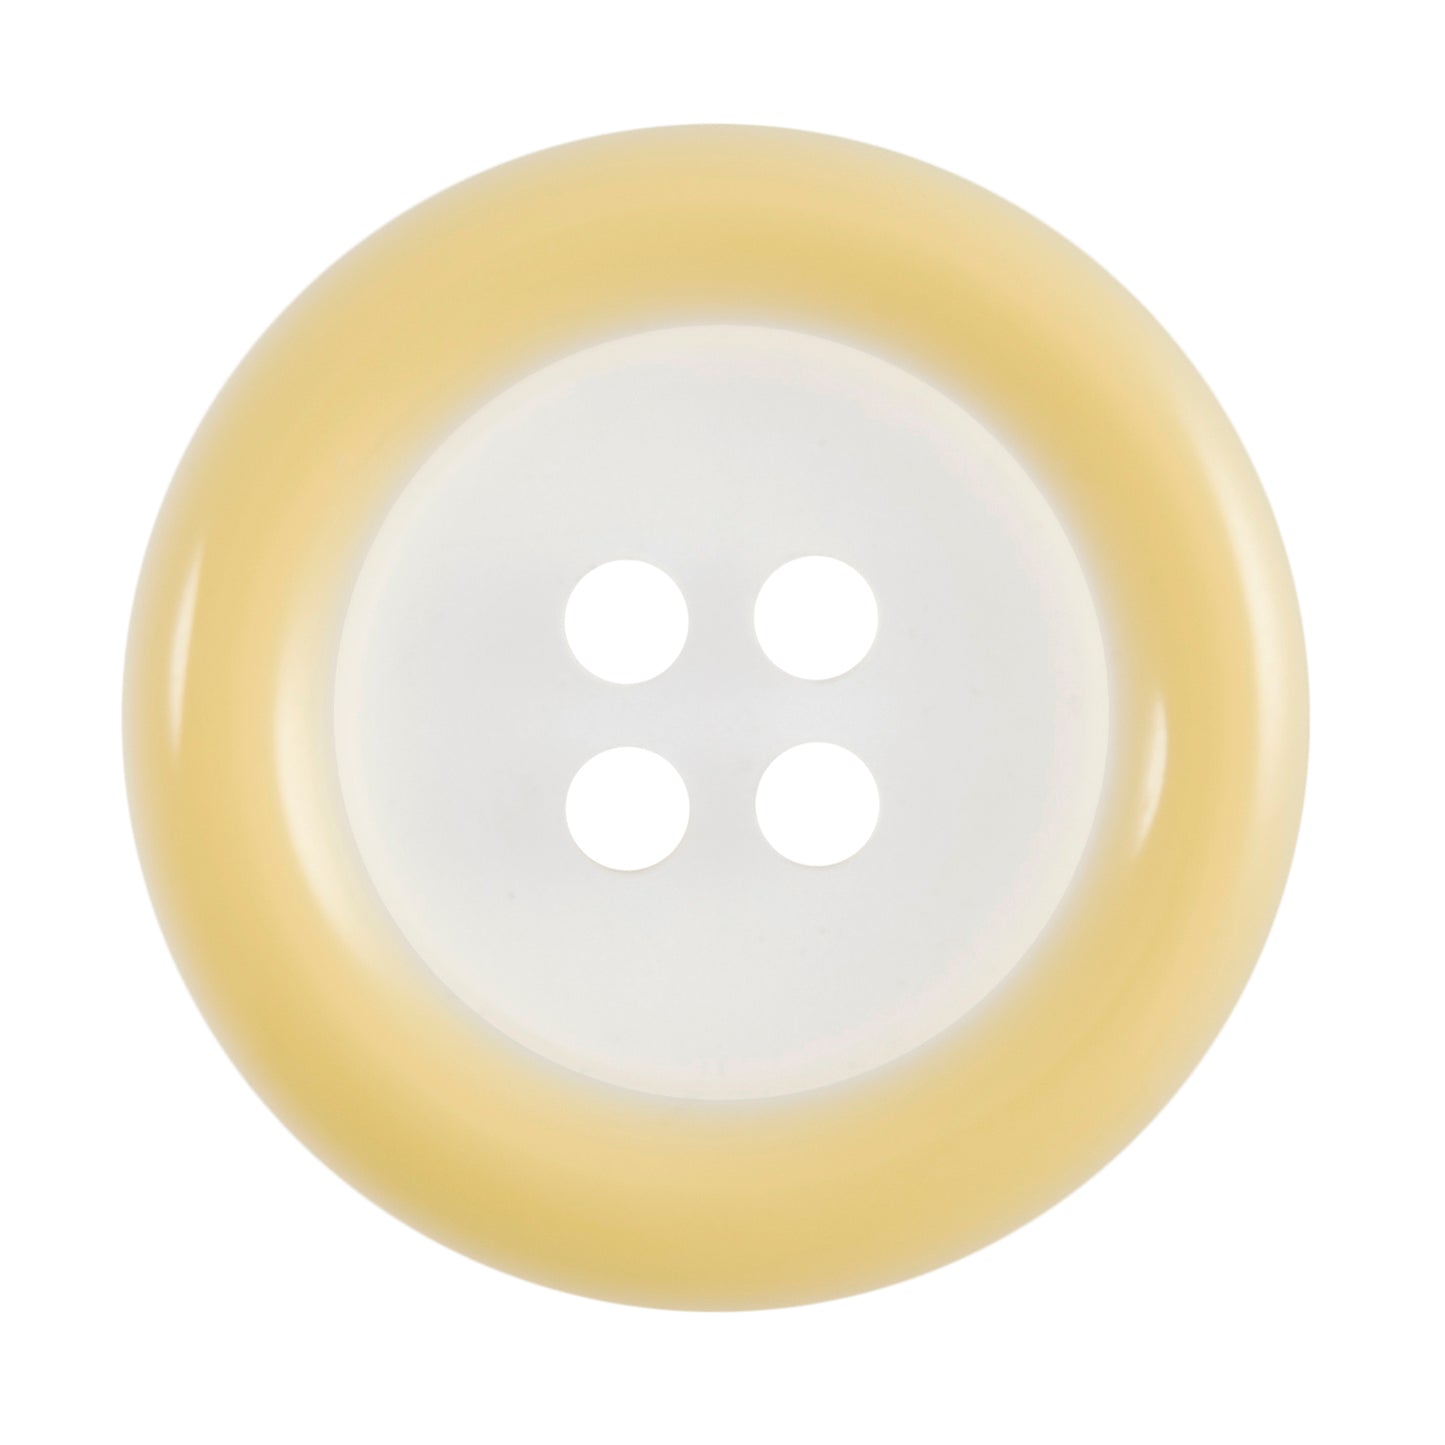 4 Hole Round Coloured Rim Button - 25mm - Light Yellow